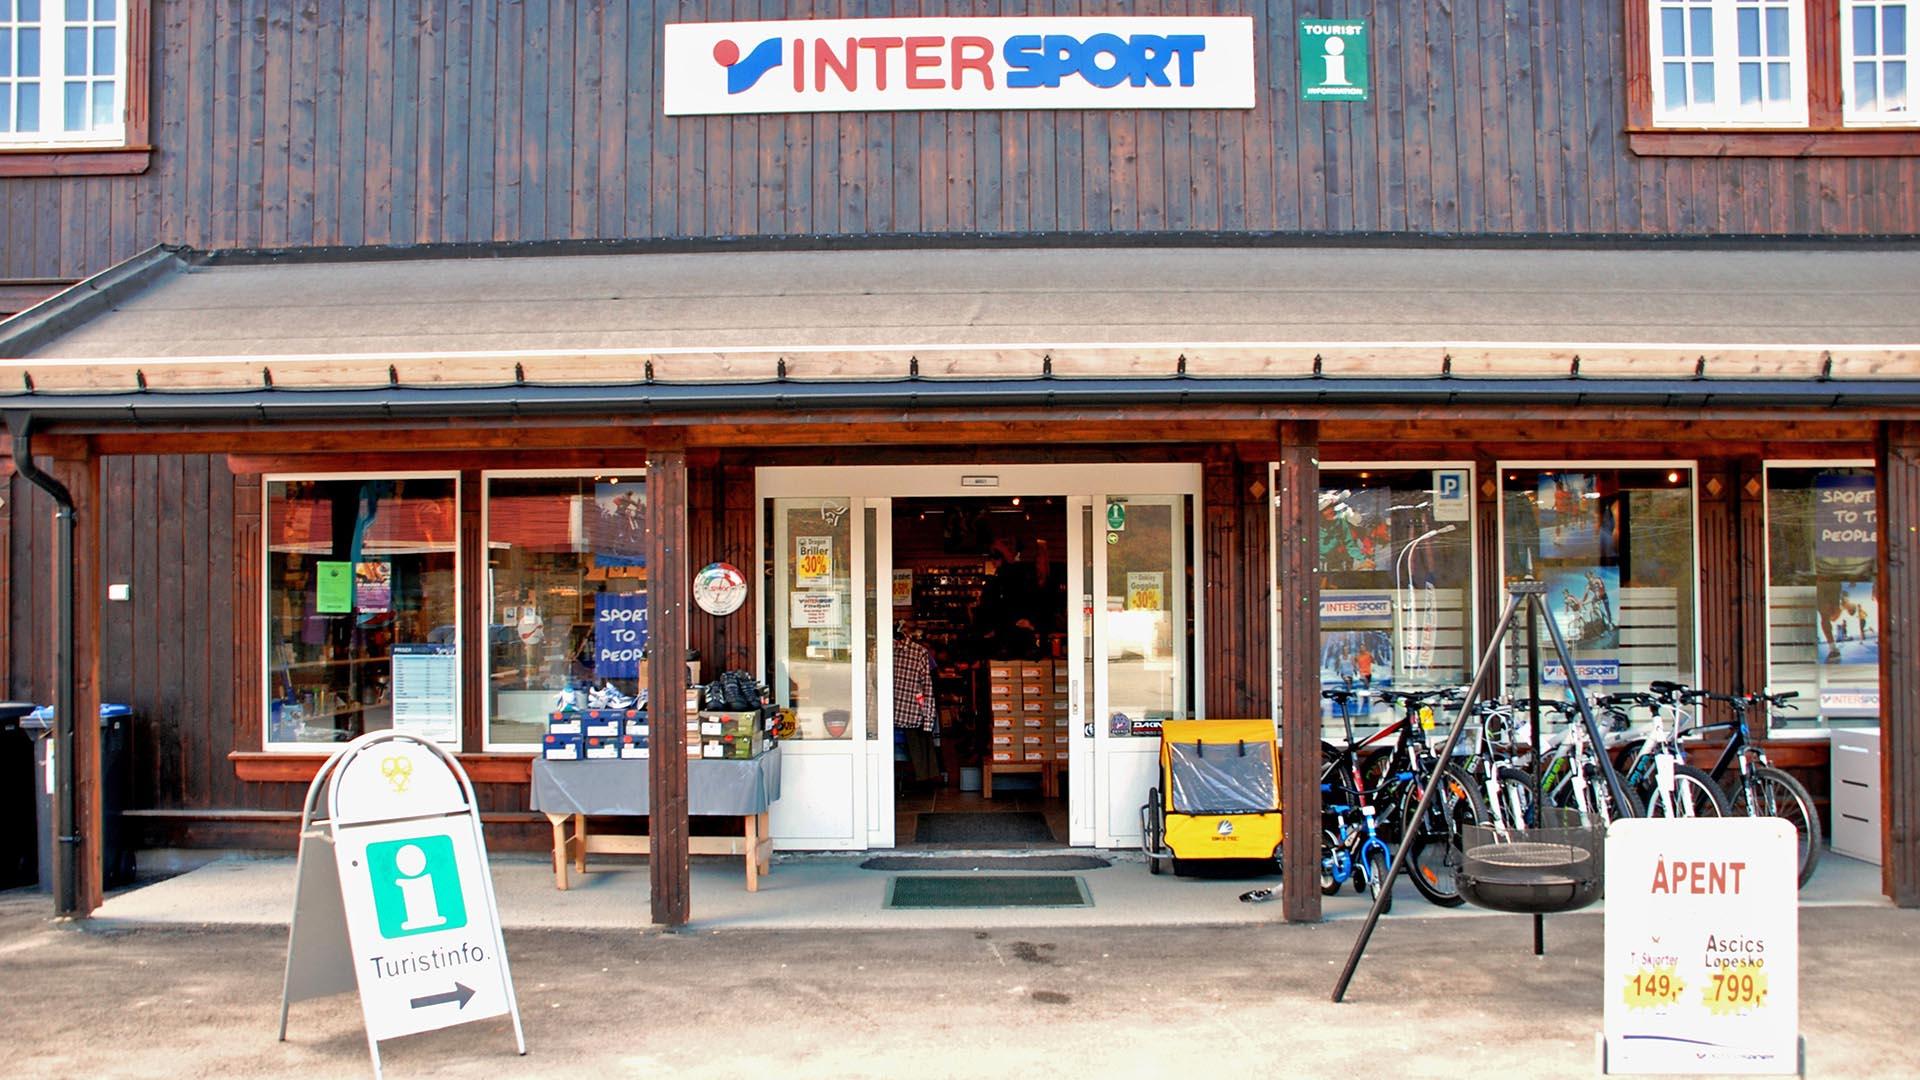 The entrance of an Intersport store which also houses the tourist information from outside